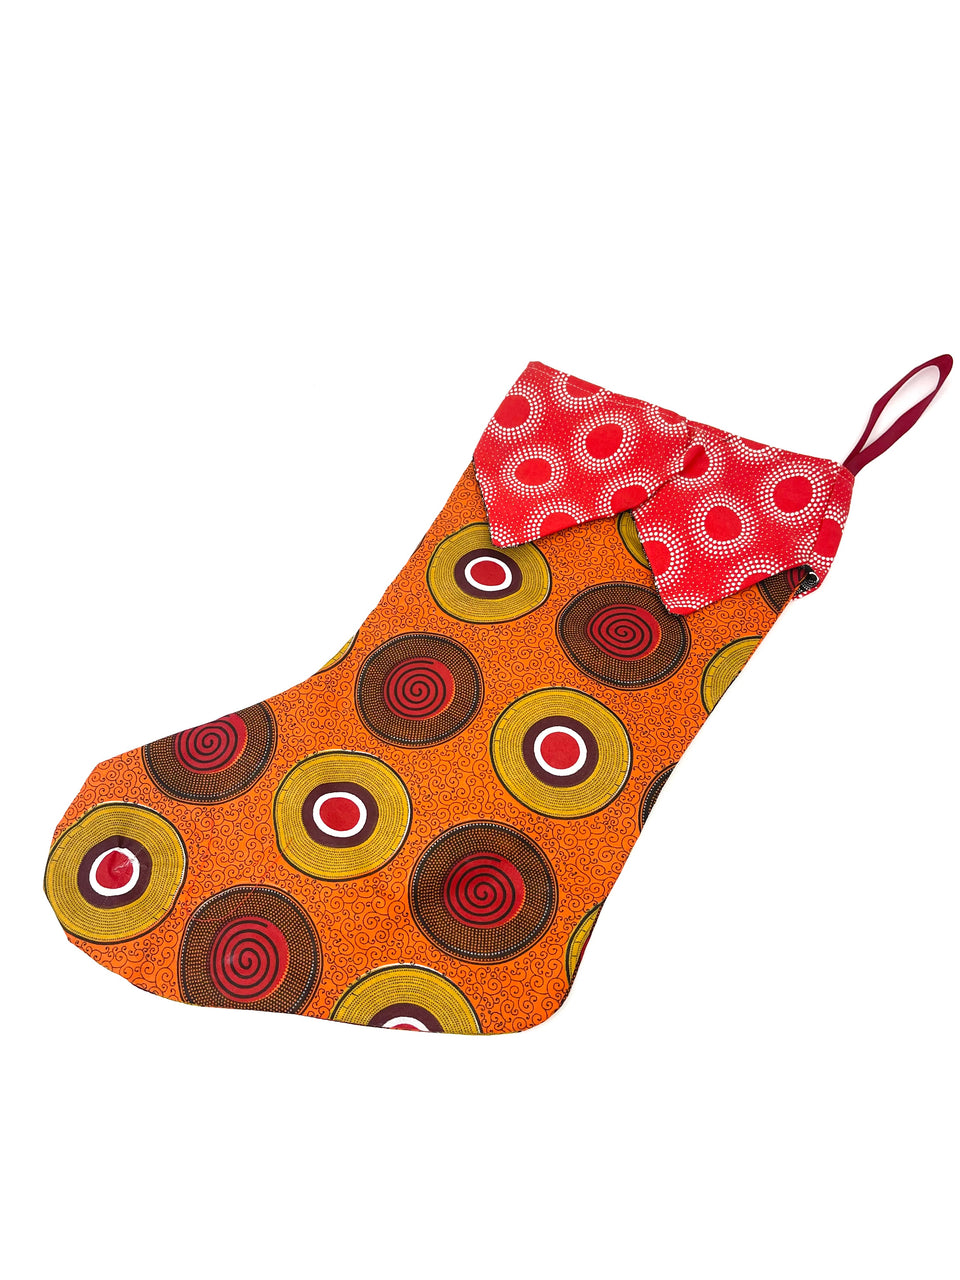 African Christmas Stockings